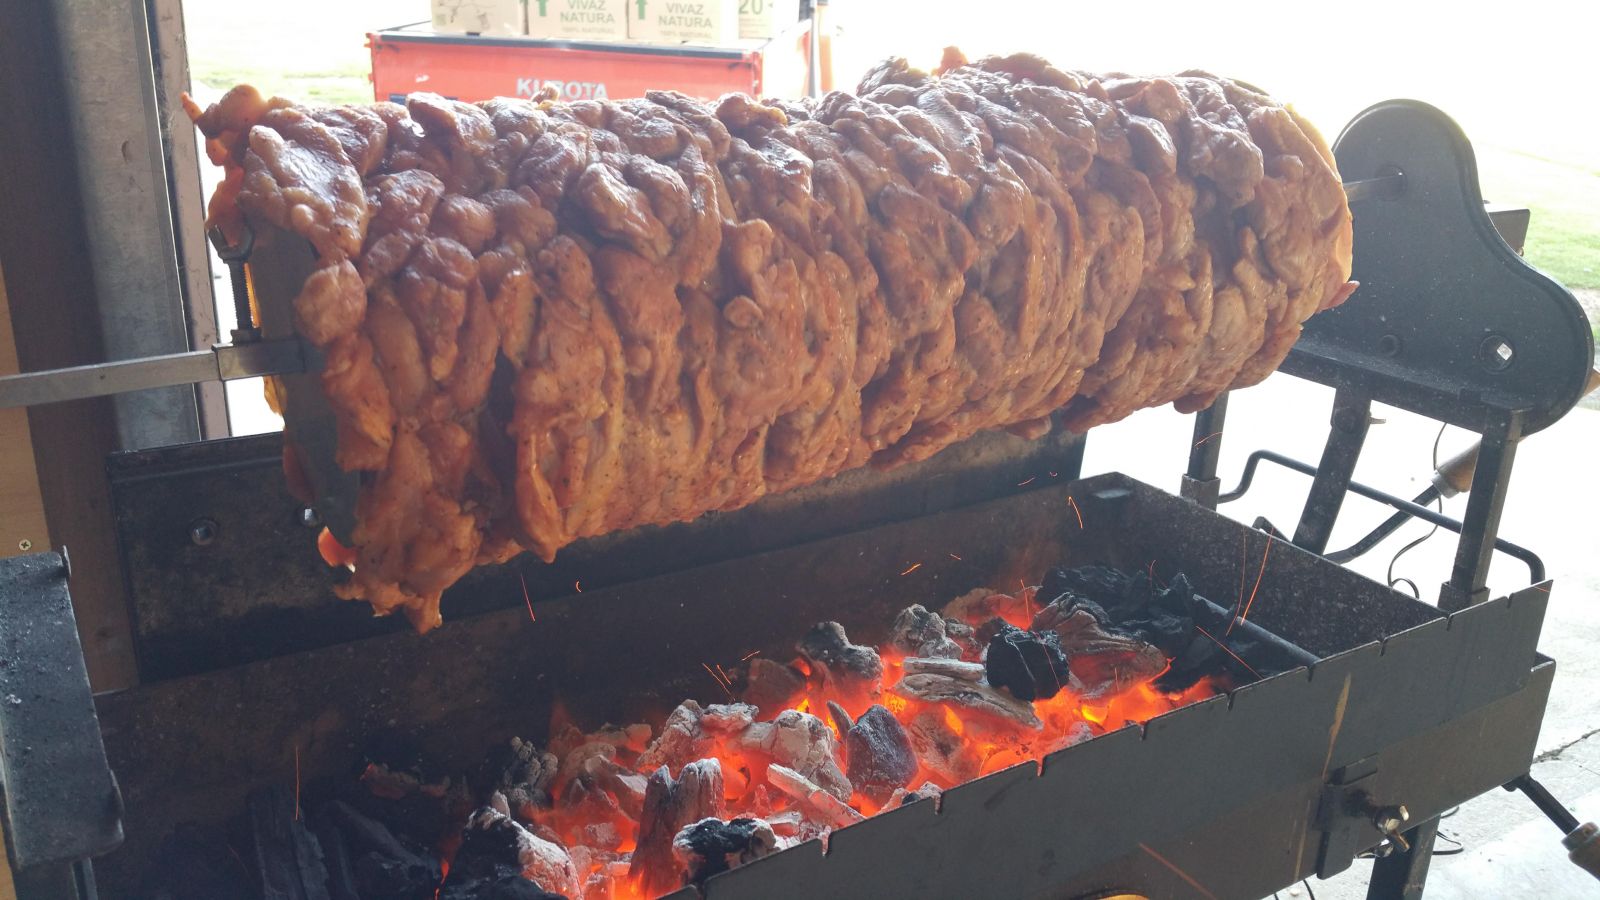 This image show a spit roaster cooking gyros above some hot mallee root lump charcoal